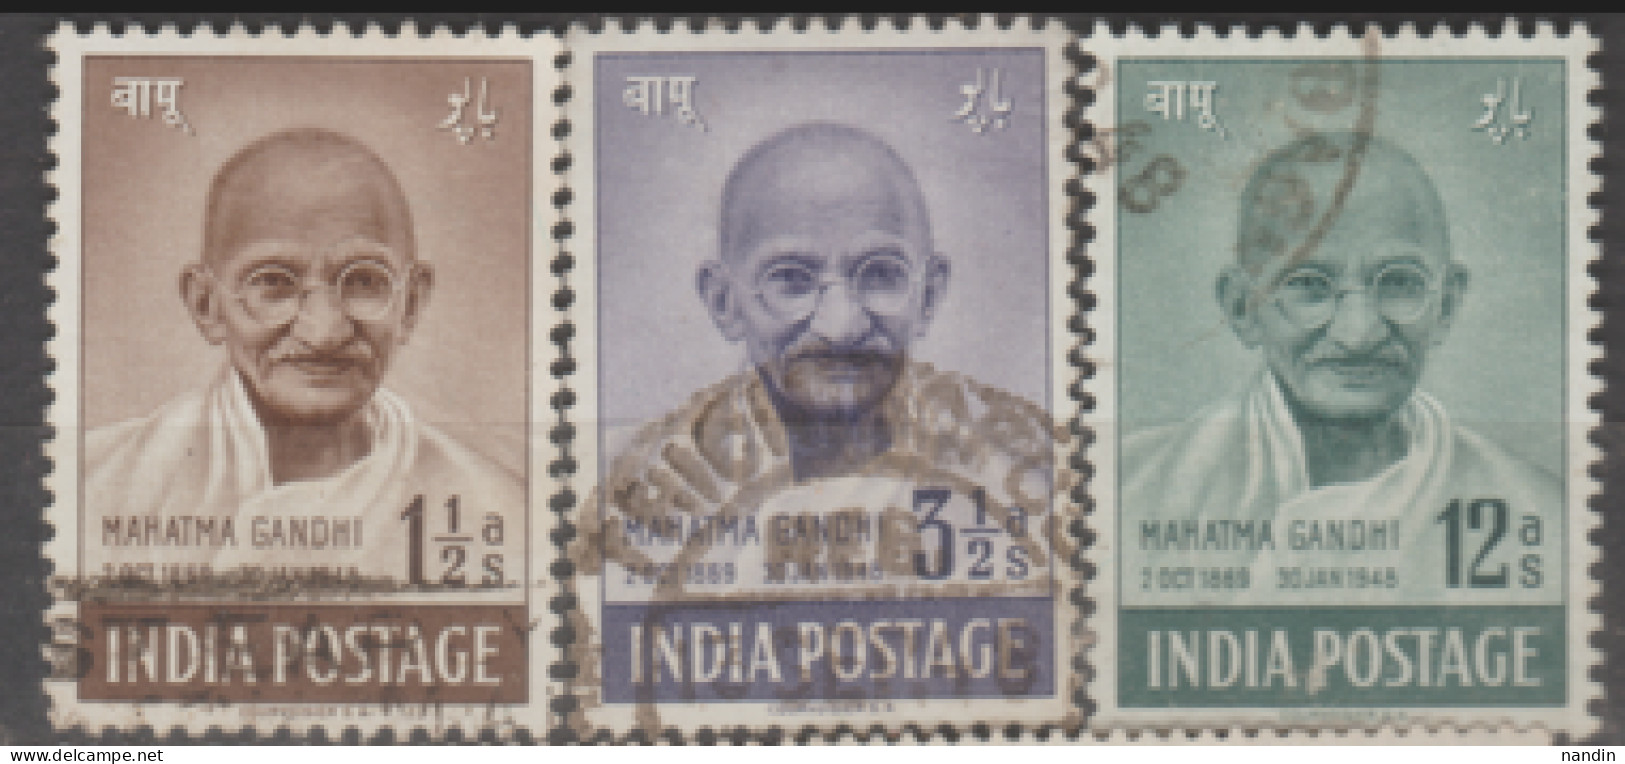 USED STAMP FROM 1948 INDIA ON GANDHI ON 1ST ANNEVERSARY OF INDEPENDENT(15TH AUG 1948) - Gebruikt